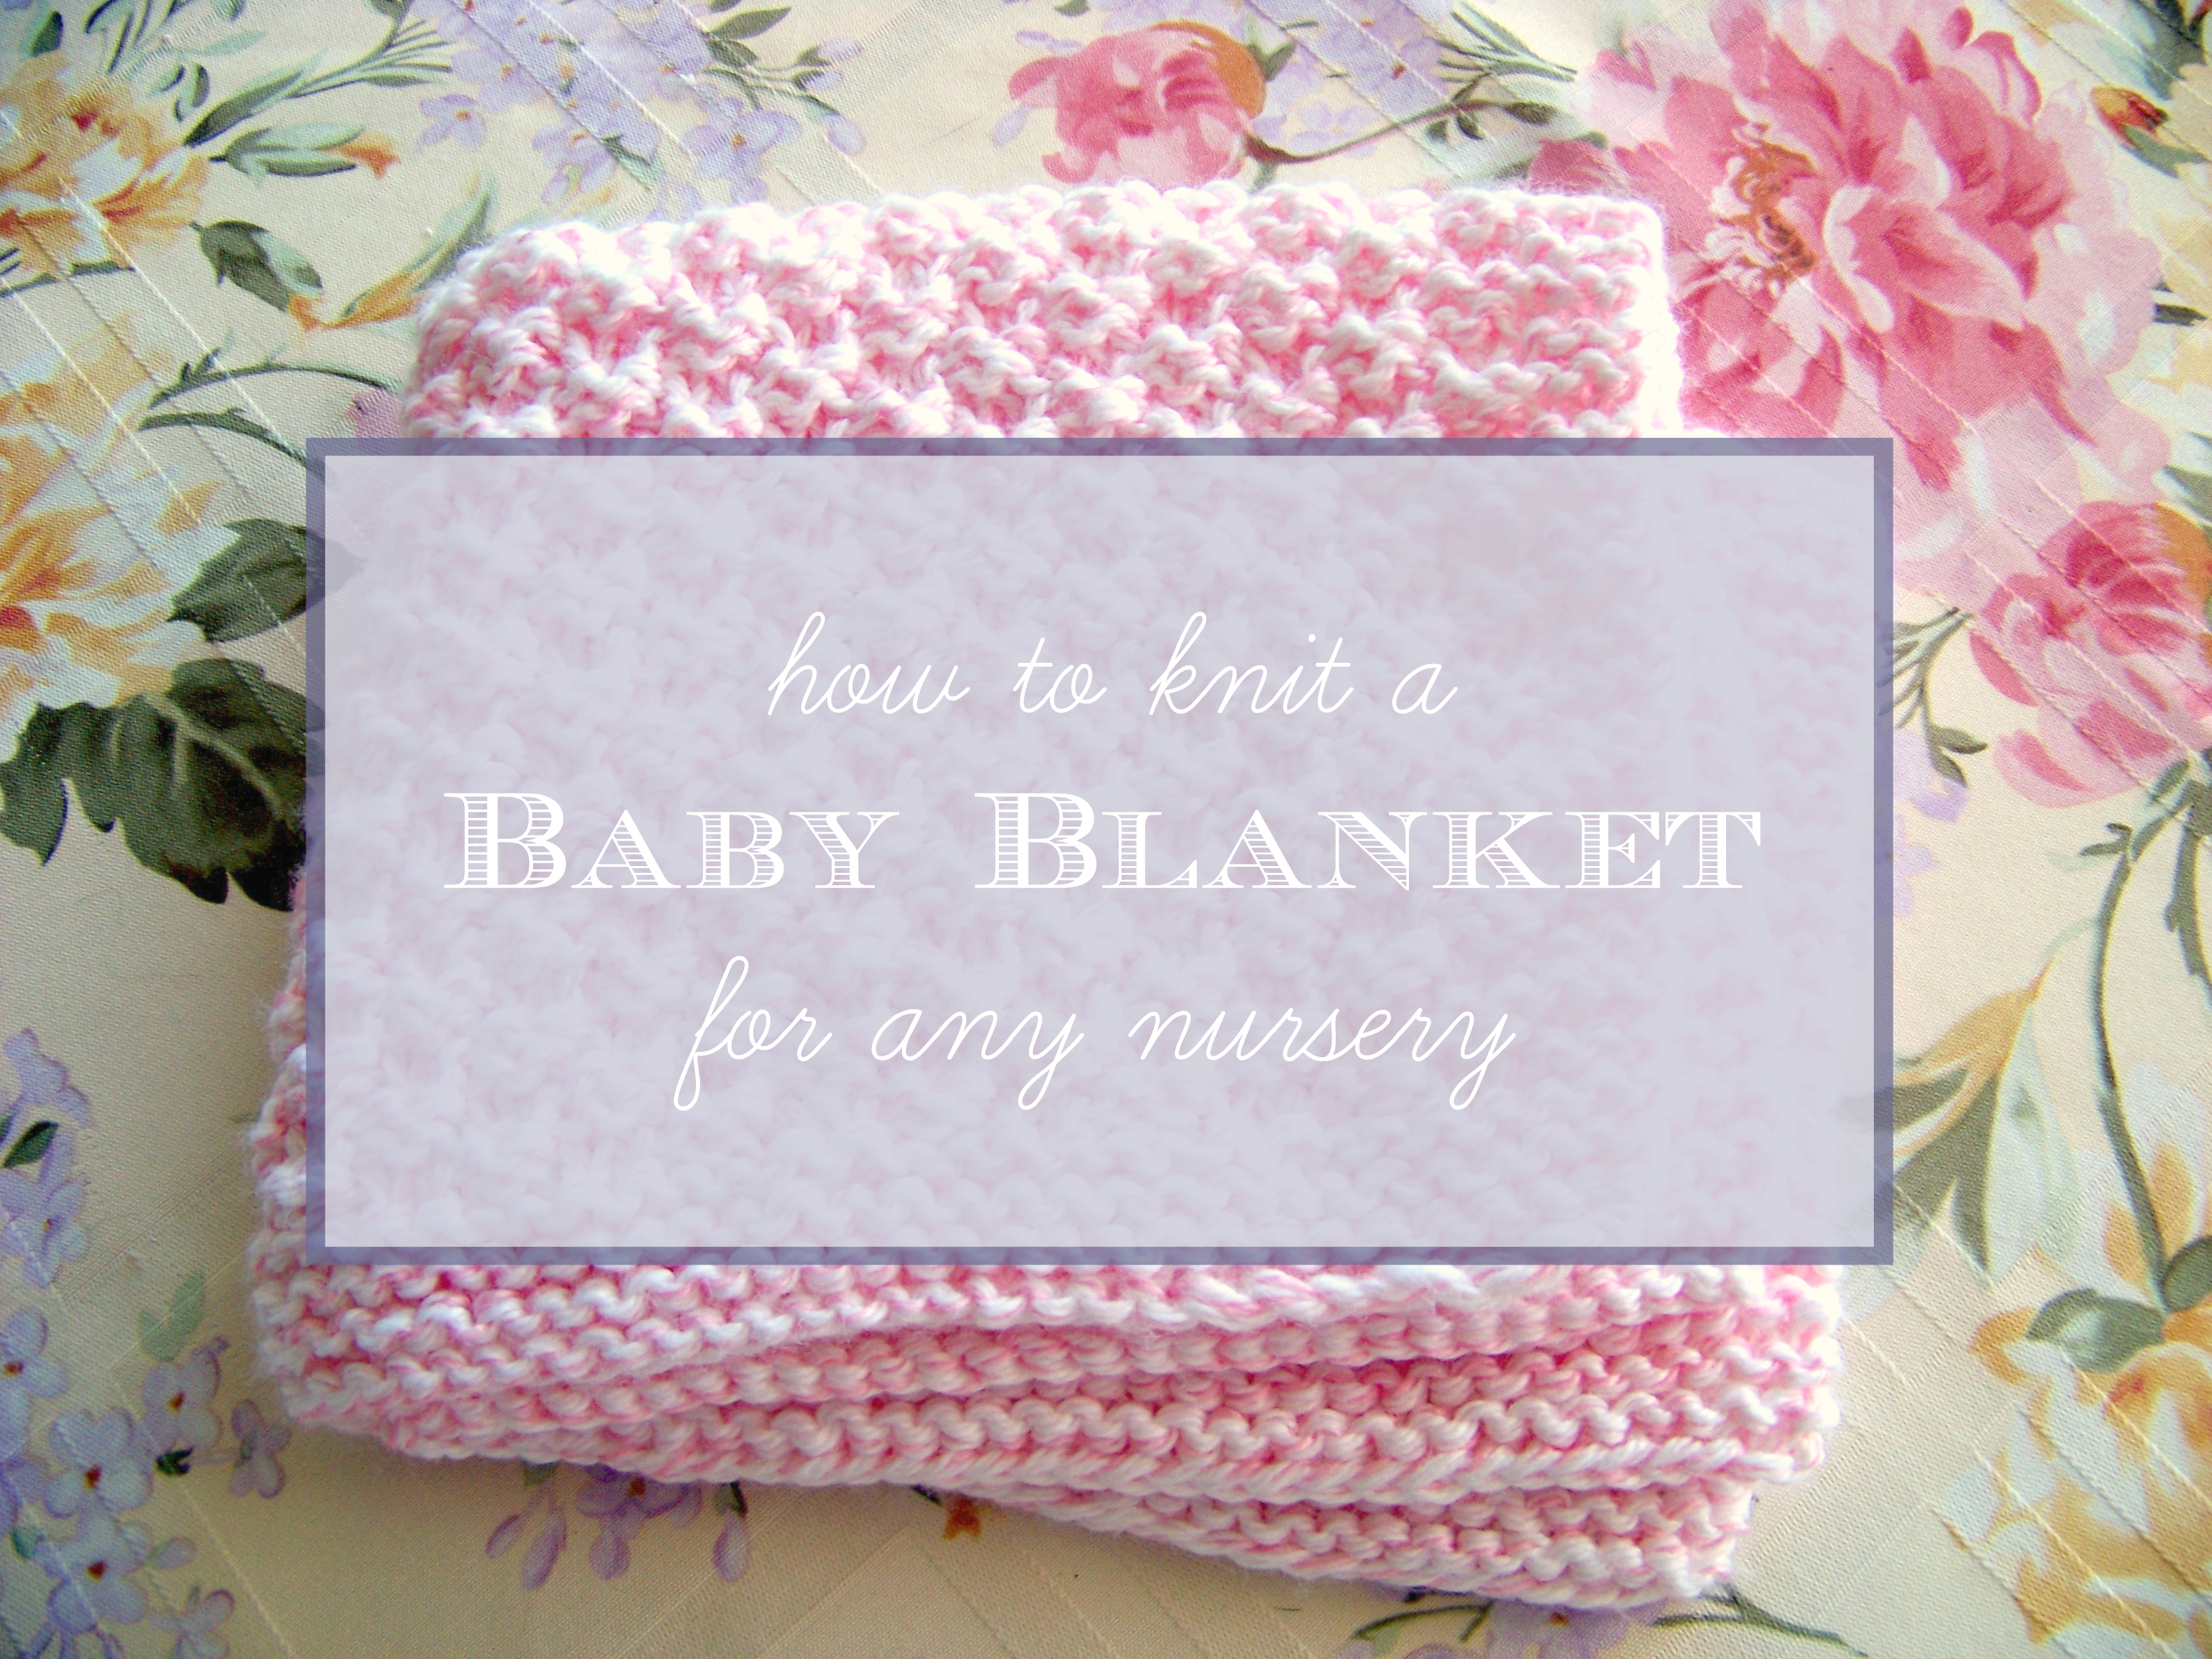 Easy Knitting Pattern For Baby Blanket How To Knit A Ba Blanket